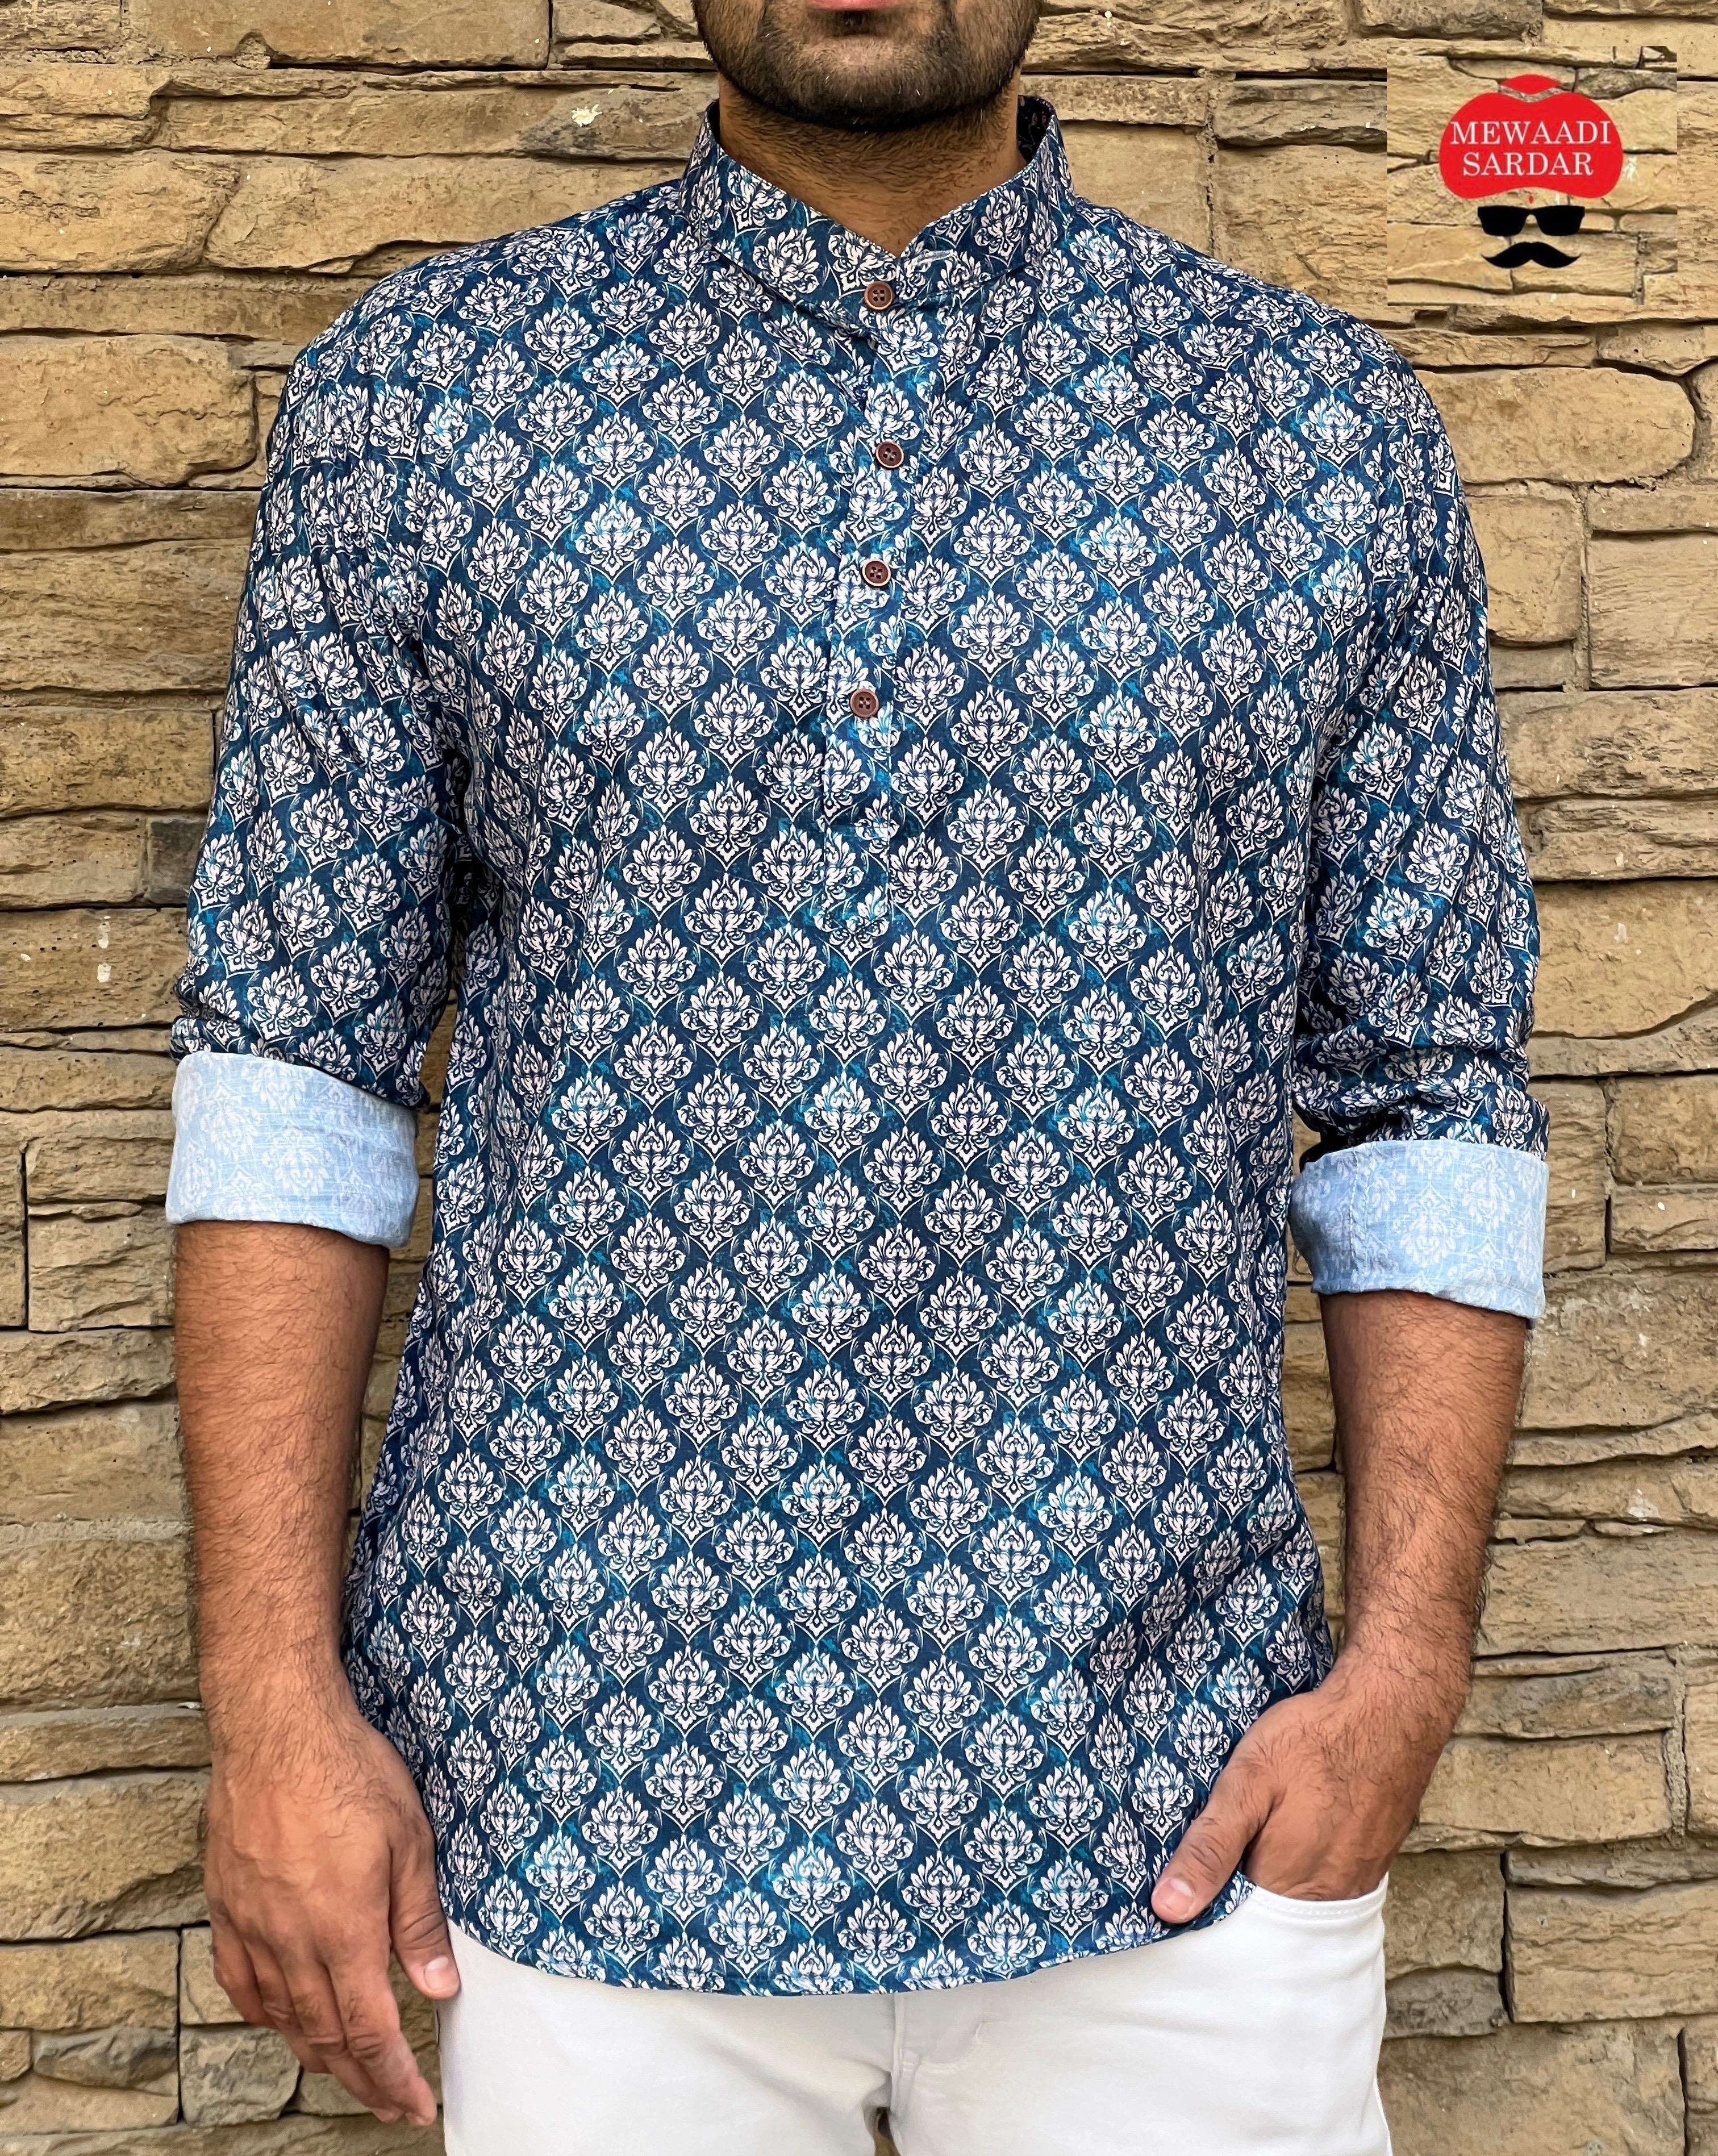 leo by mewaadi sardar hit print collection full sleeves short length kurta fabric cotton cuff on sleeves size m to xxl kurta style shirts for mens  